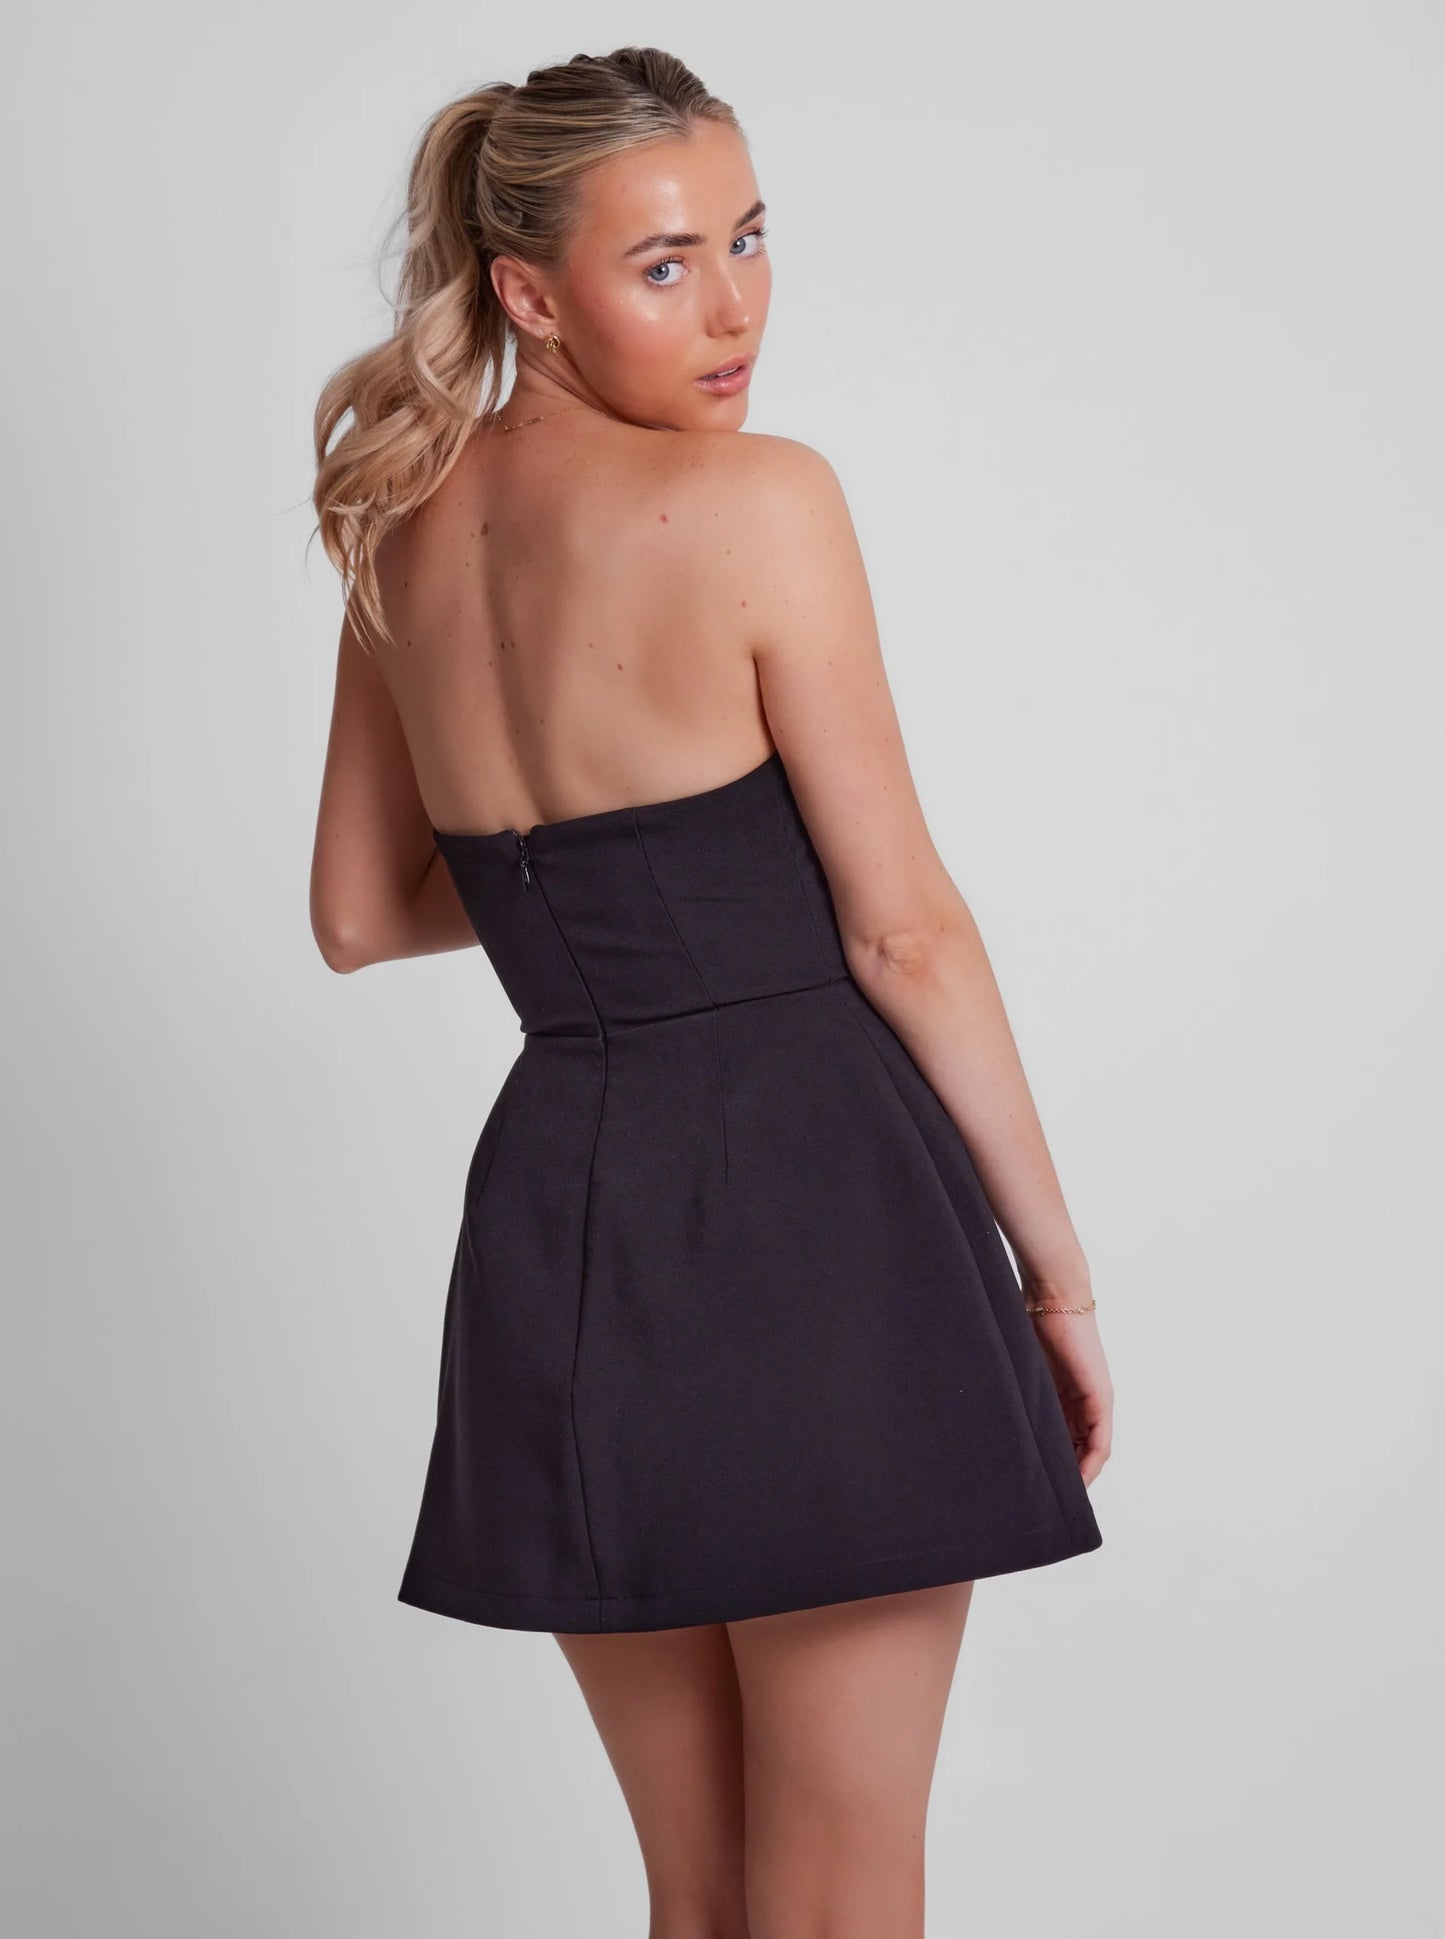 Odd Muse The Ultimate Muse Strapless Dress Black